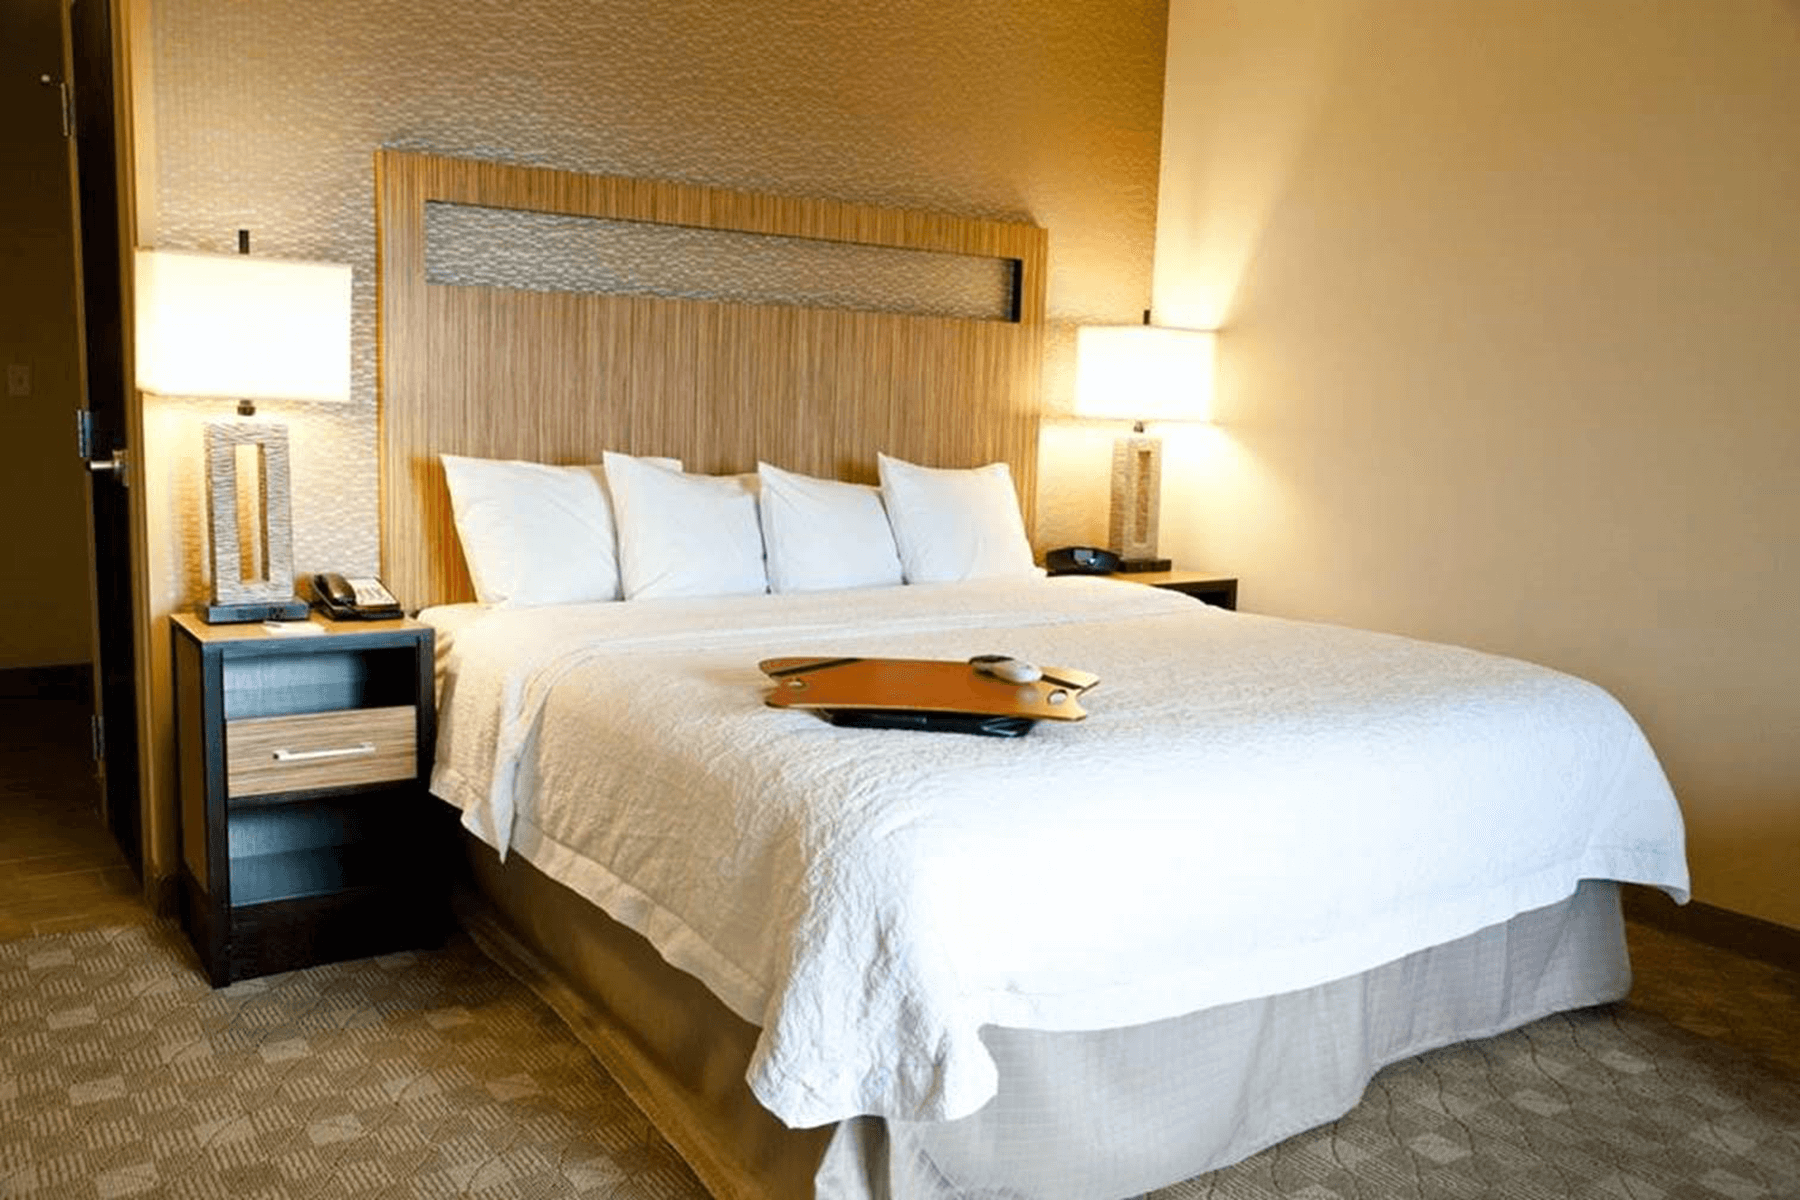  Hampton Inn and Suites Salinas room interior with king size bed 